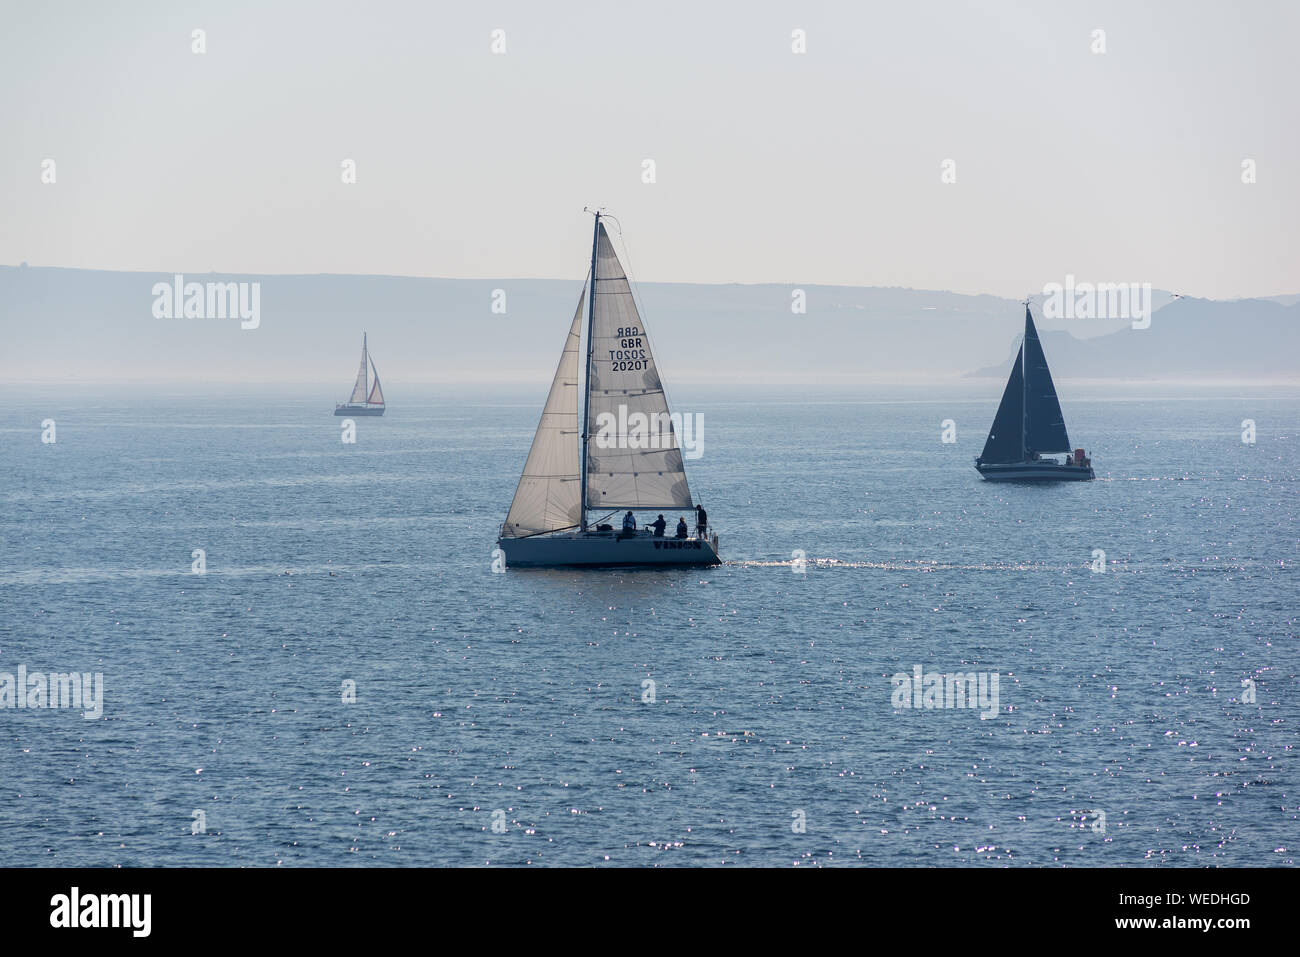 Sail boats off the coast of Scarborough, North Yorkshire, UK, on a calm, hazy summer morning. Stock Photo